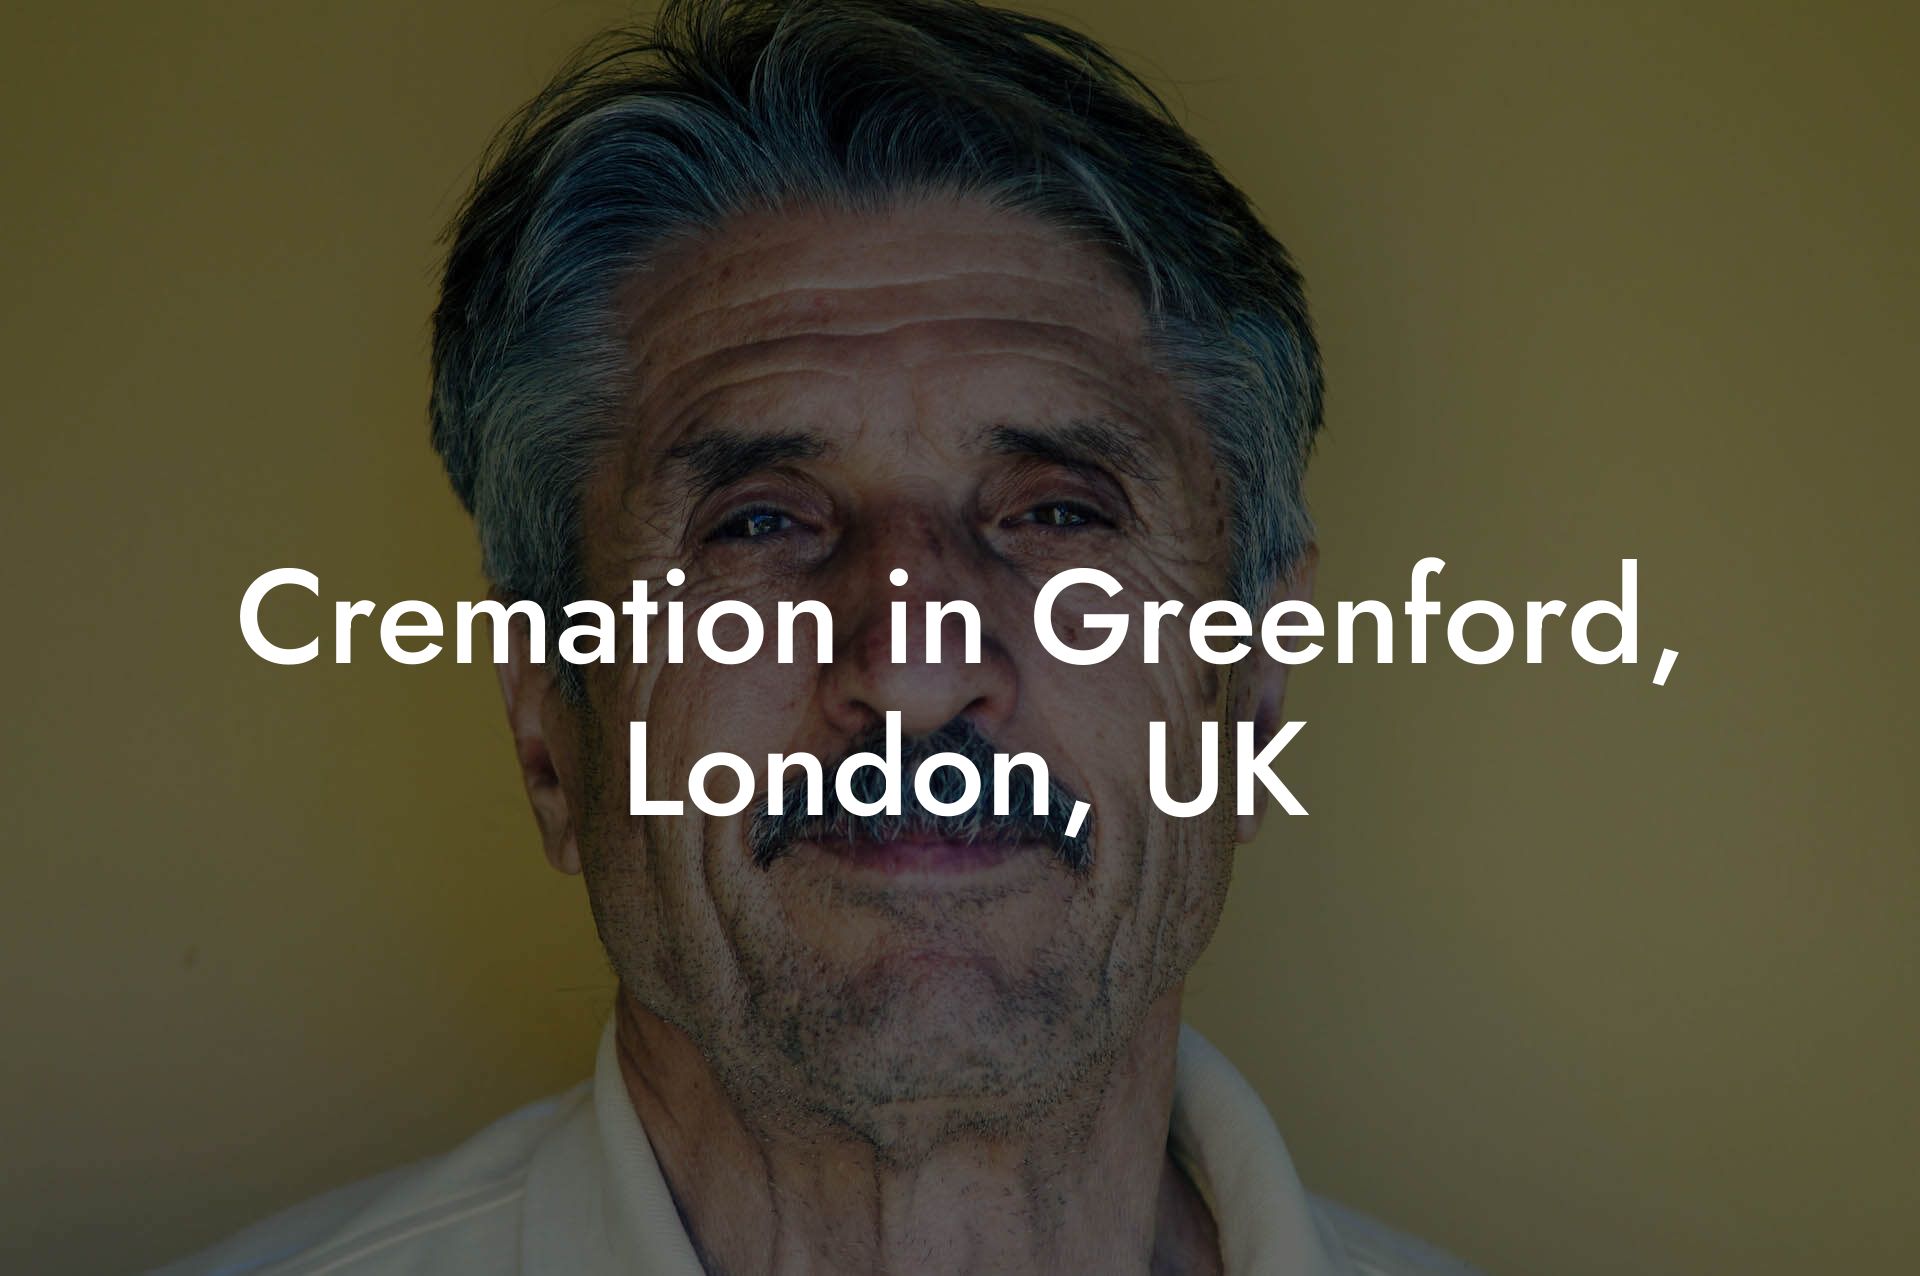 Cremation in Greenford, London, UK